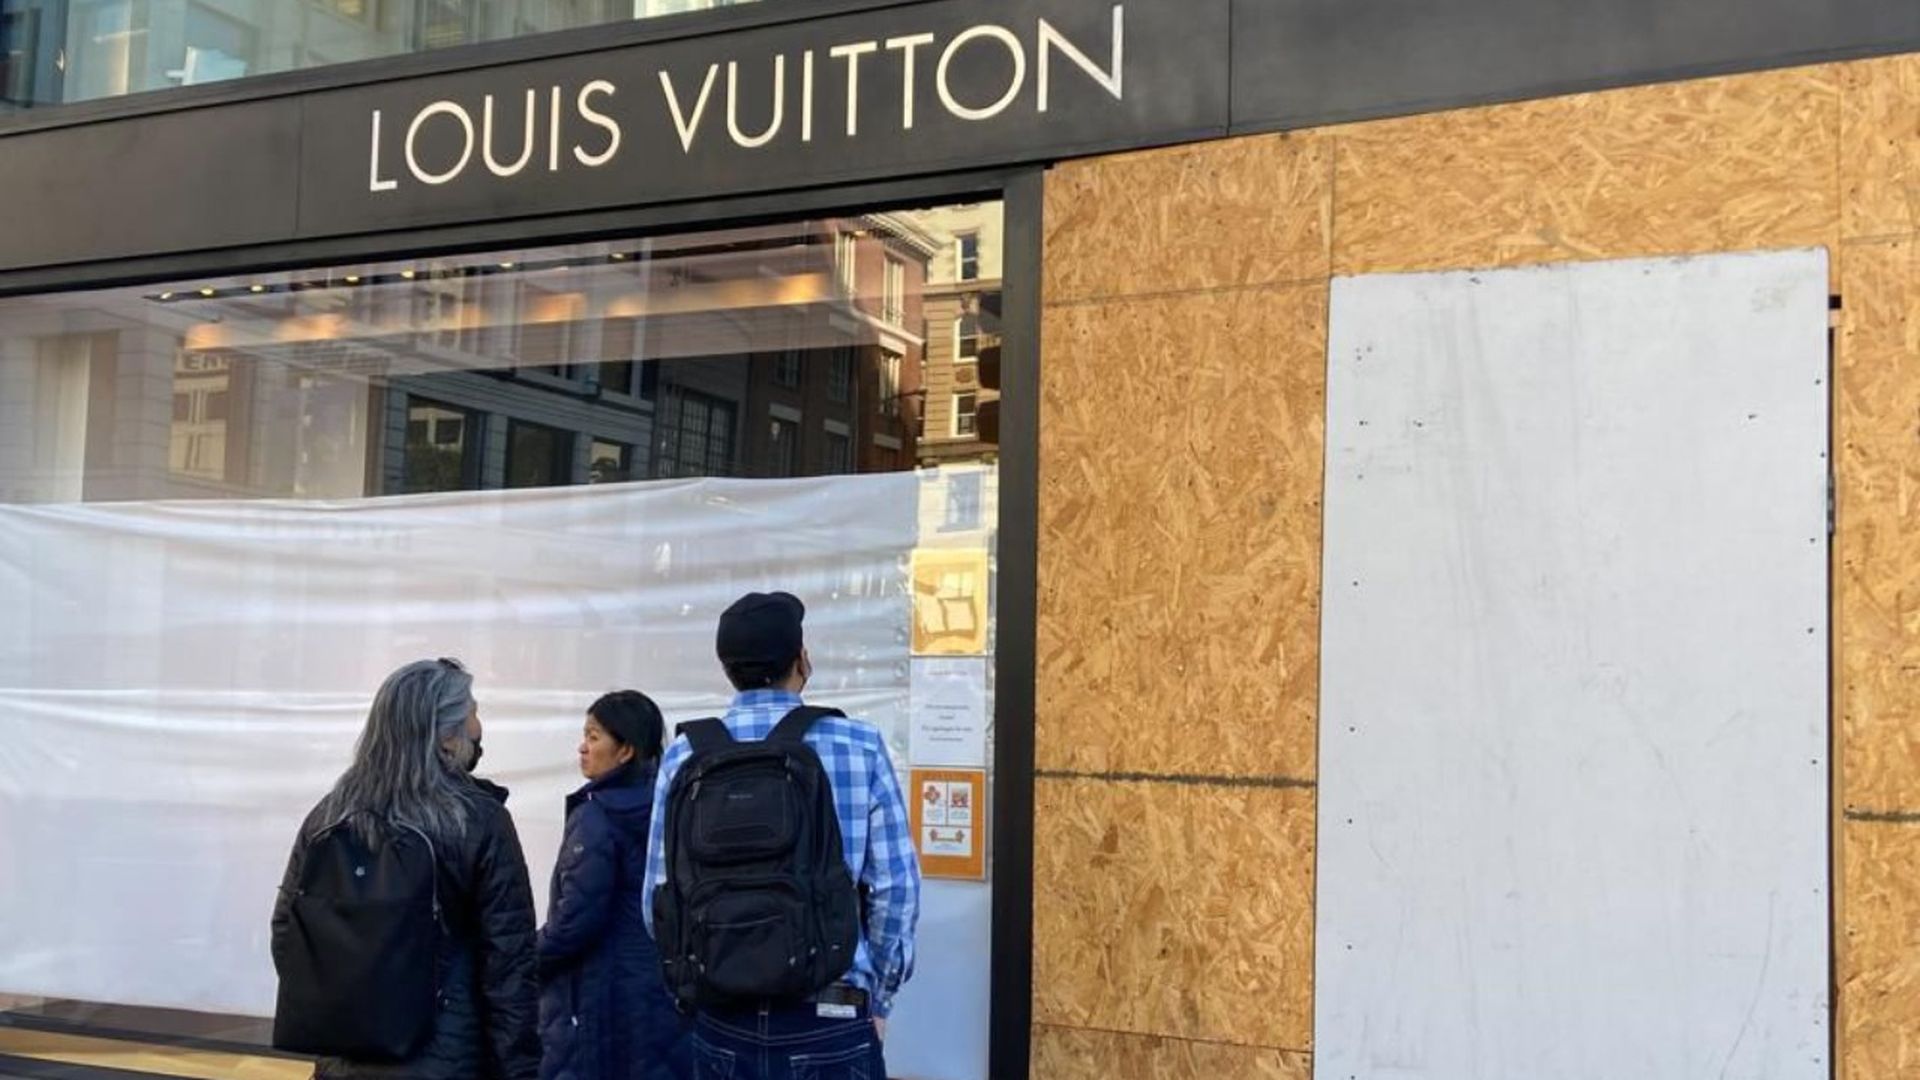 Damage is seen Sunday at the Louis Vuitton store in Union Square, San Francisco.